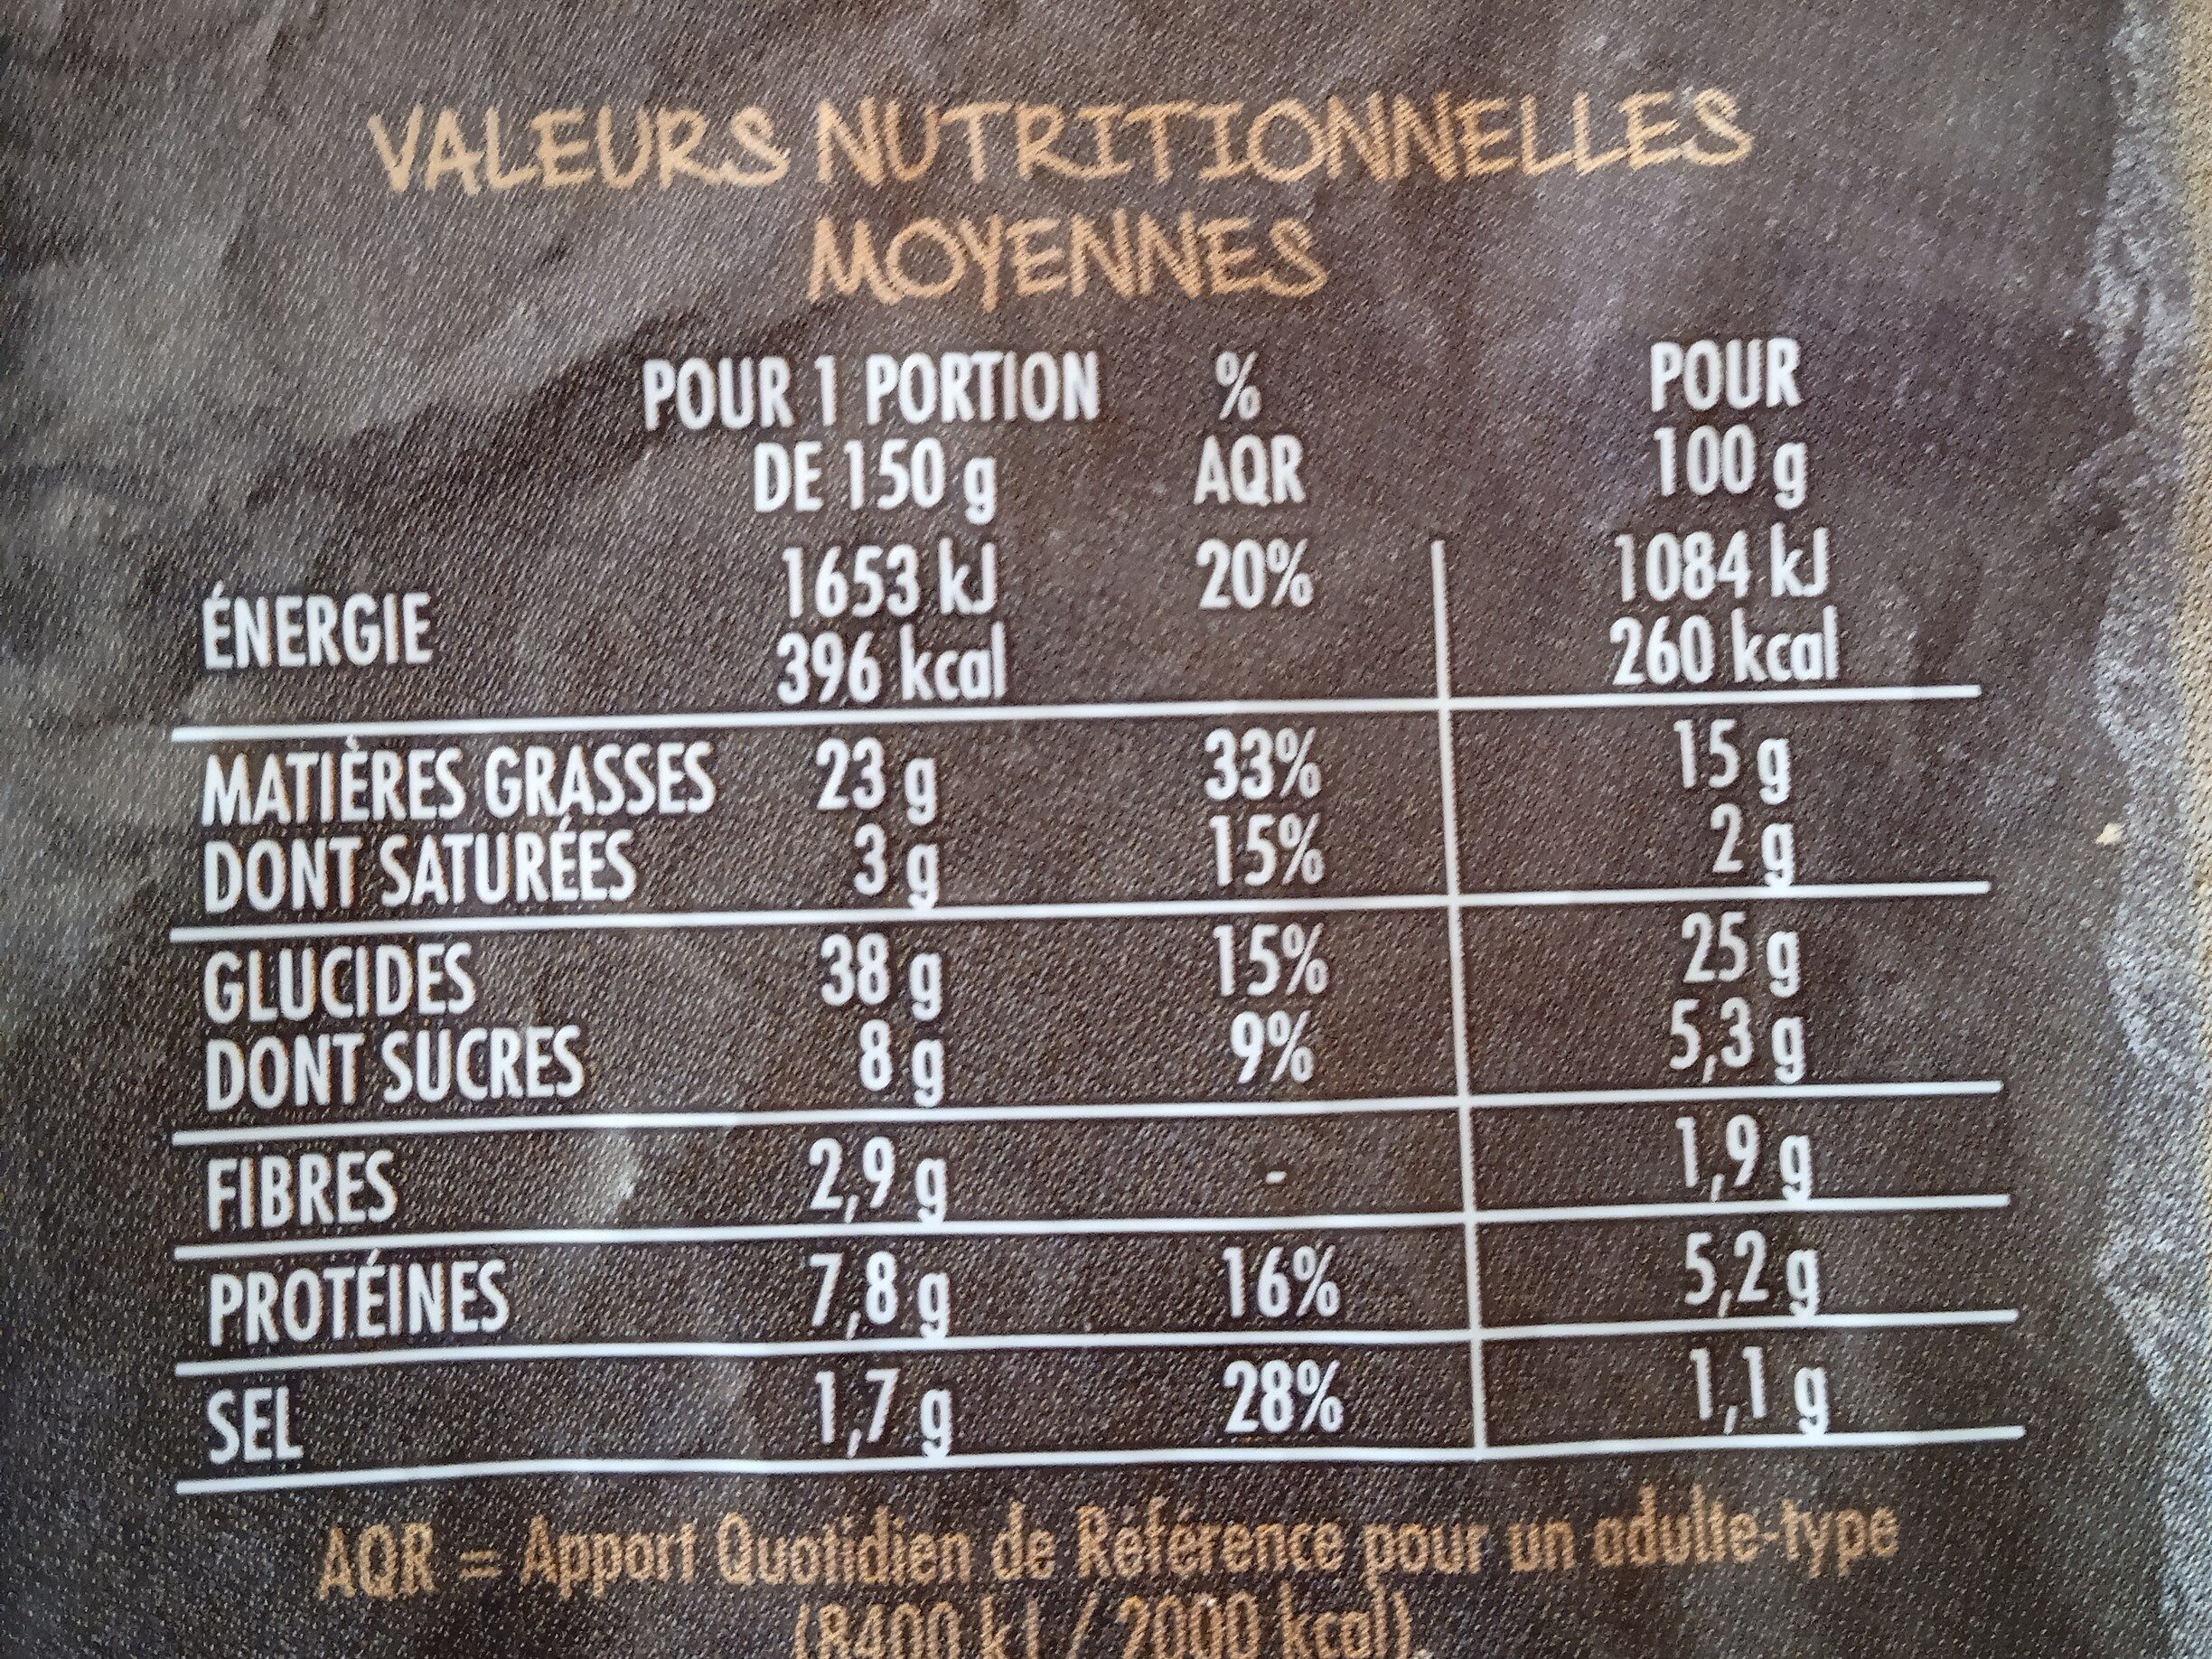 Pommes Dauphines - Nutrition facts - fr